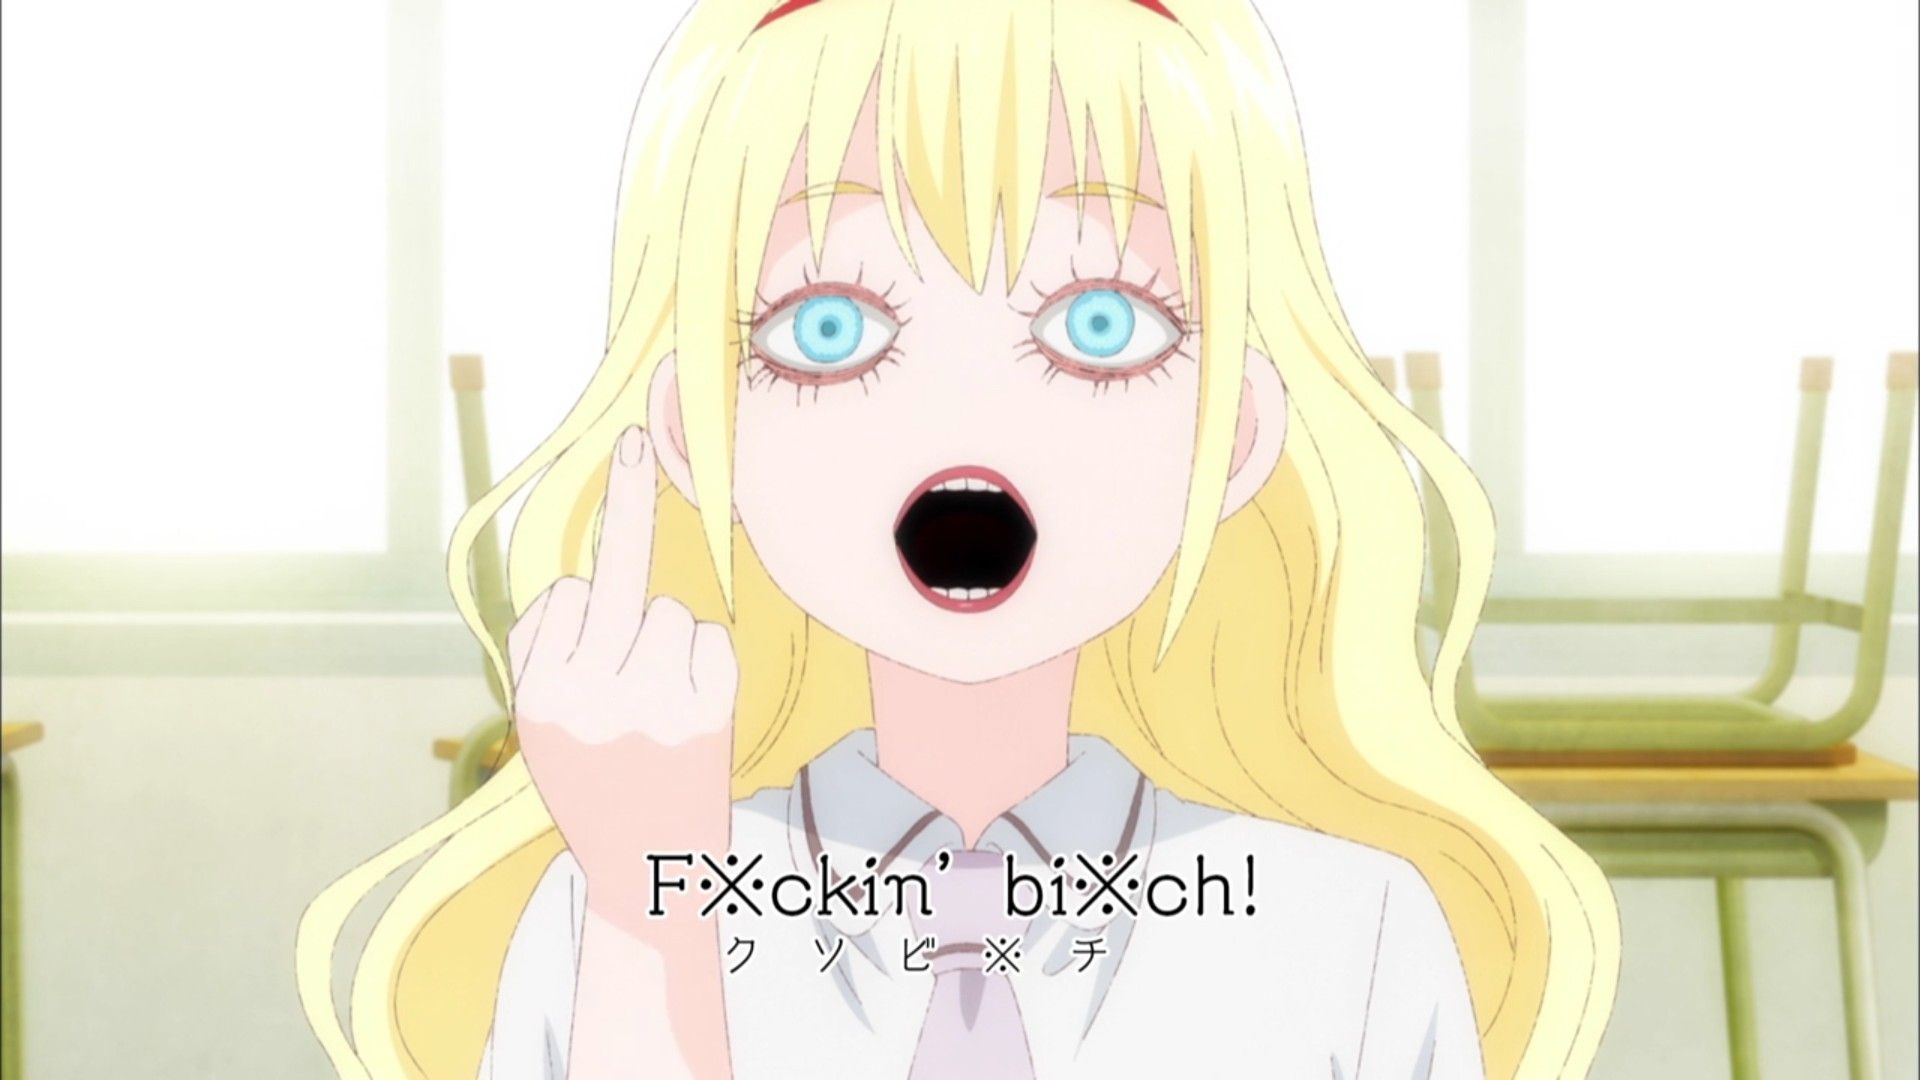 asobi asobase. Anime expressions, Anime drawings tutorials, Anime drawings